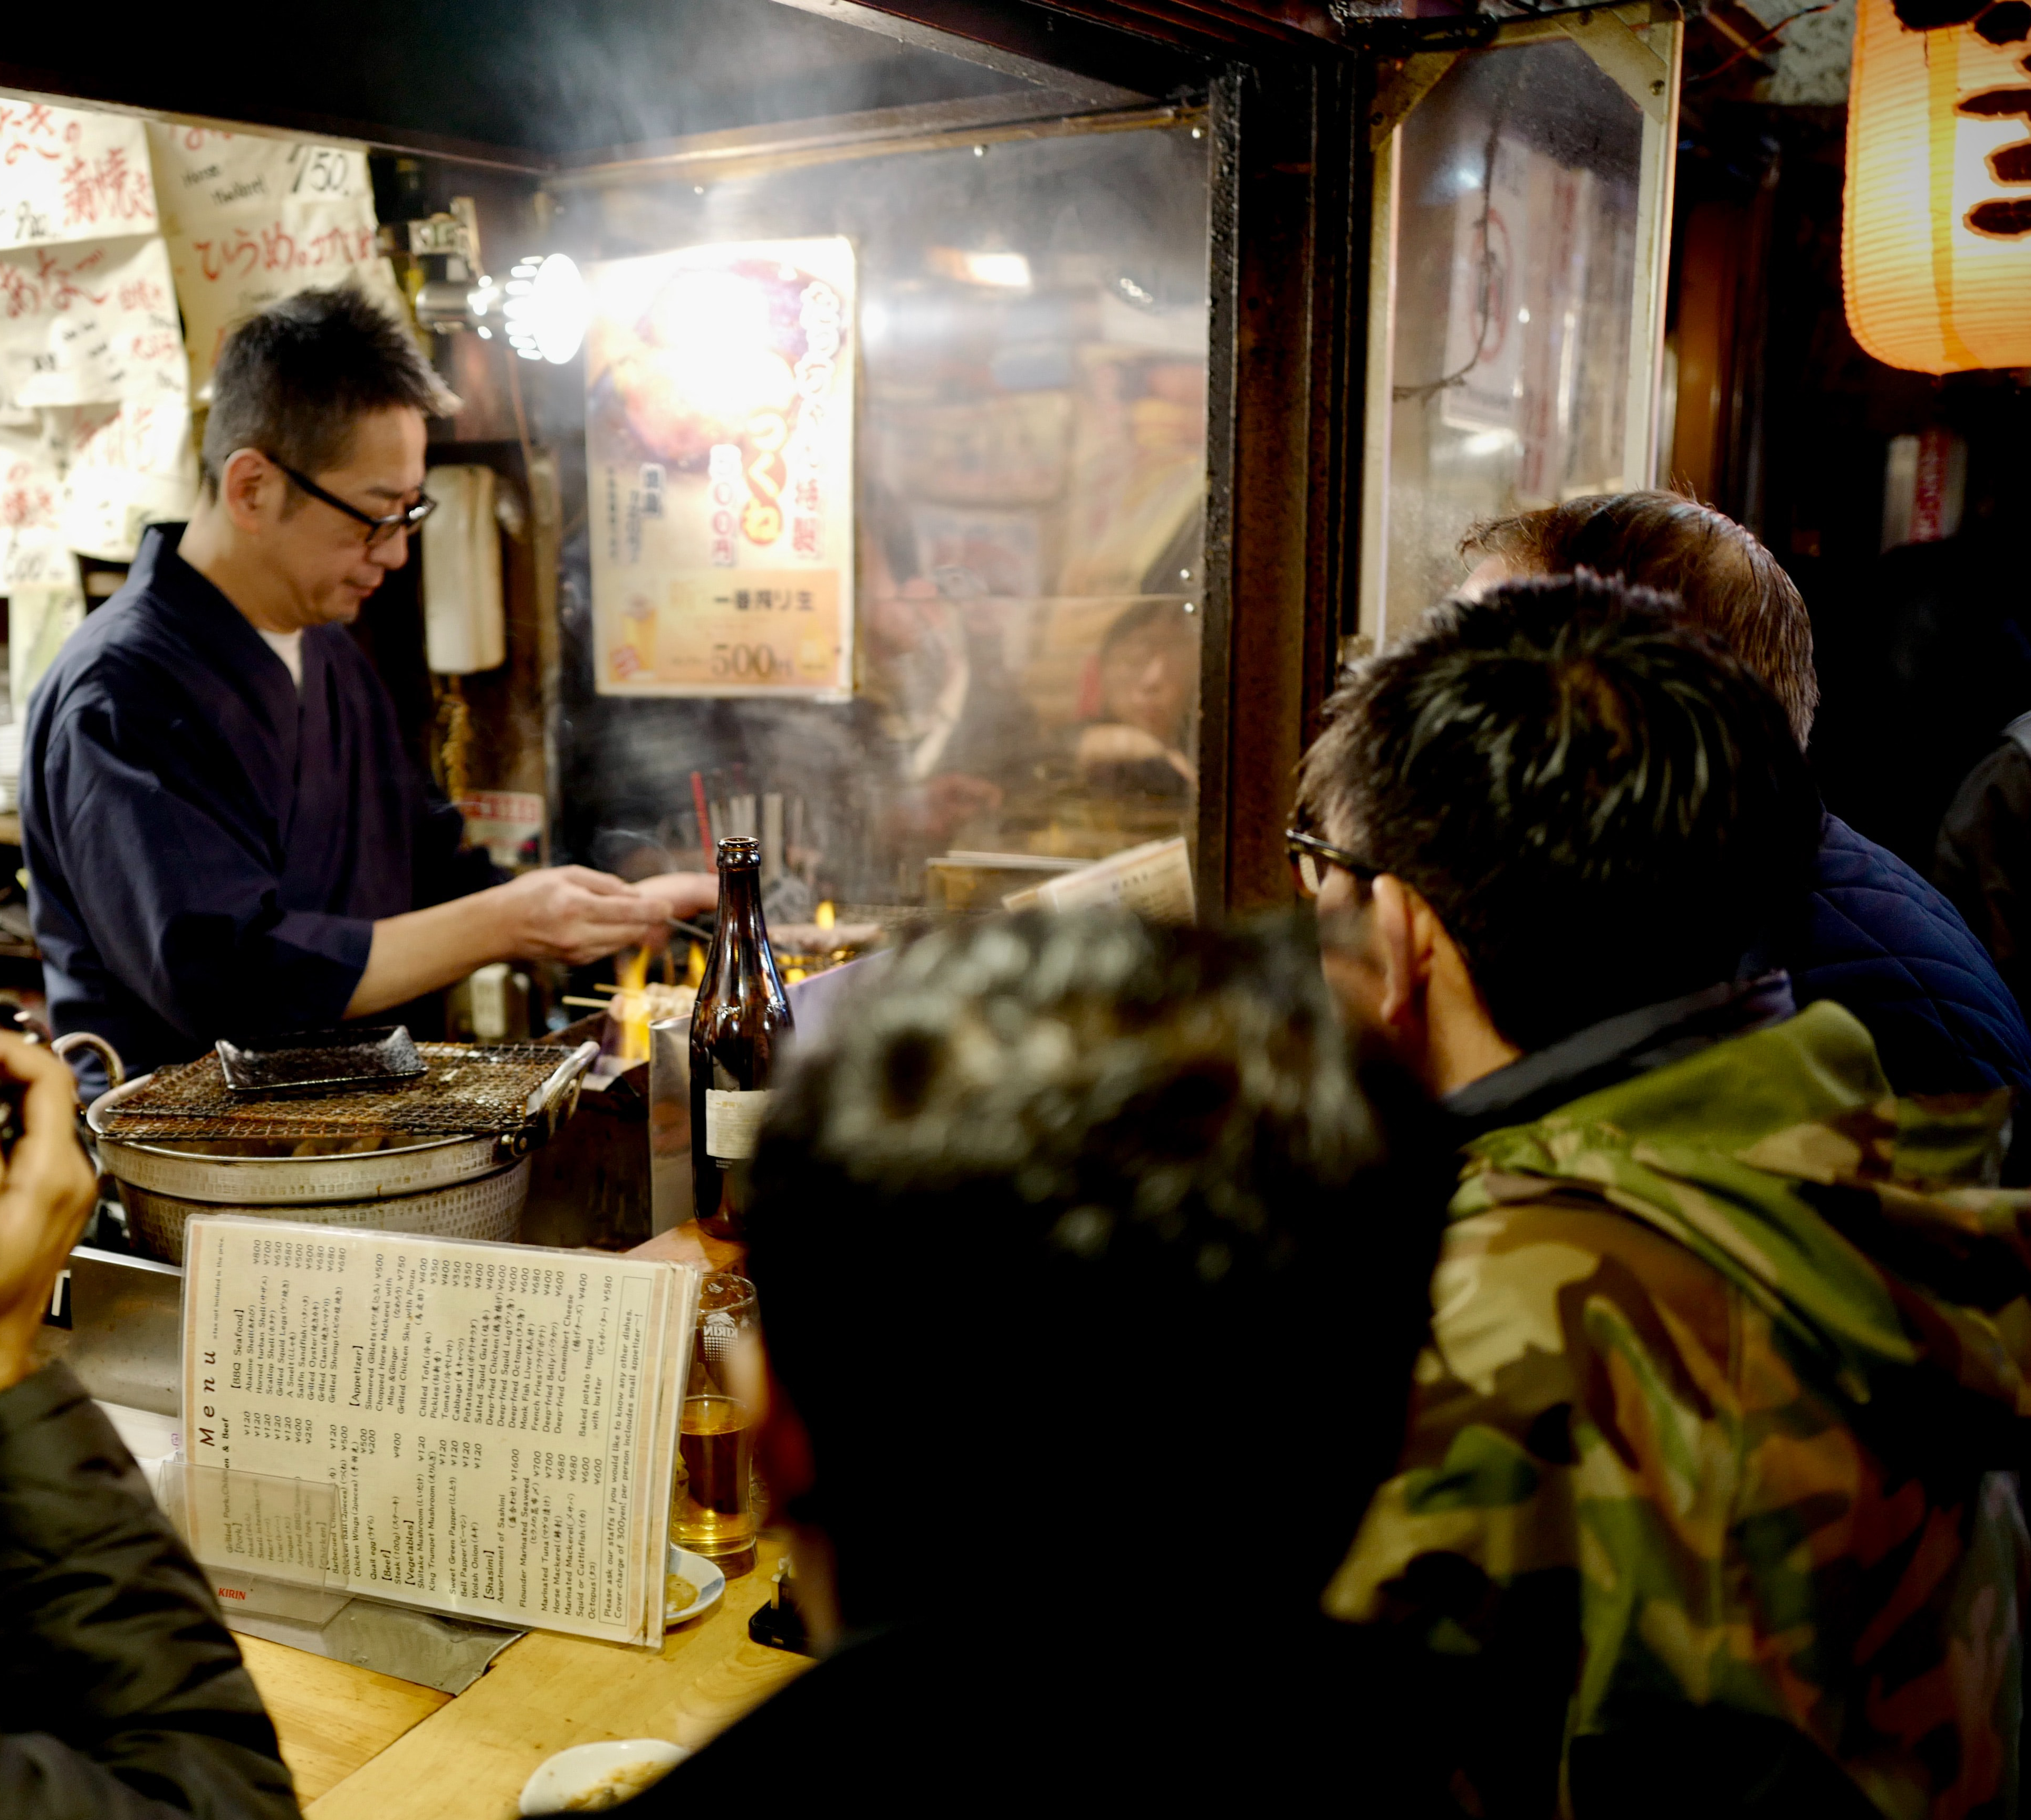 Japanese pub where a cook is gilling meat